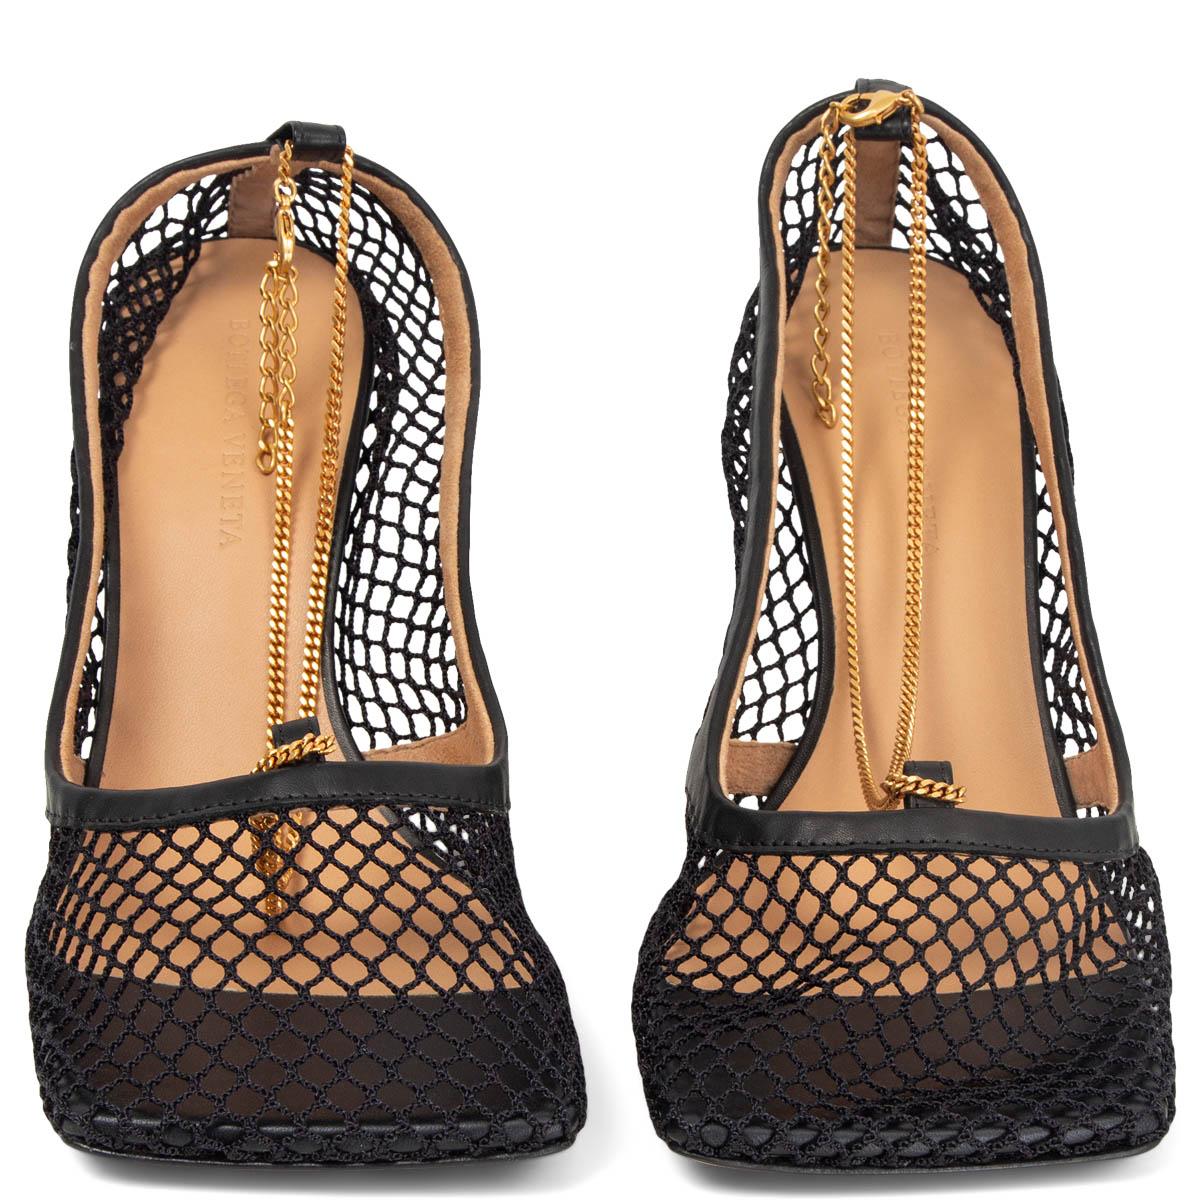 100% authentic Bottega Veneta Stretch Chain pumps in black cotton mesh and leather featuring gold-tone hardware. Brand new. Come with dust bag.

Measurements
Imprinted Size	40
Shoe Size	40
Inside Sole	26cm (10.1in)
Width	8cm (3.1in)
Heel	10cm